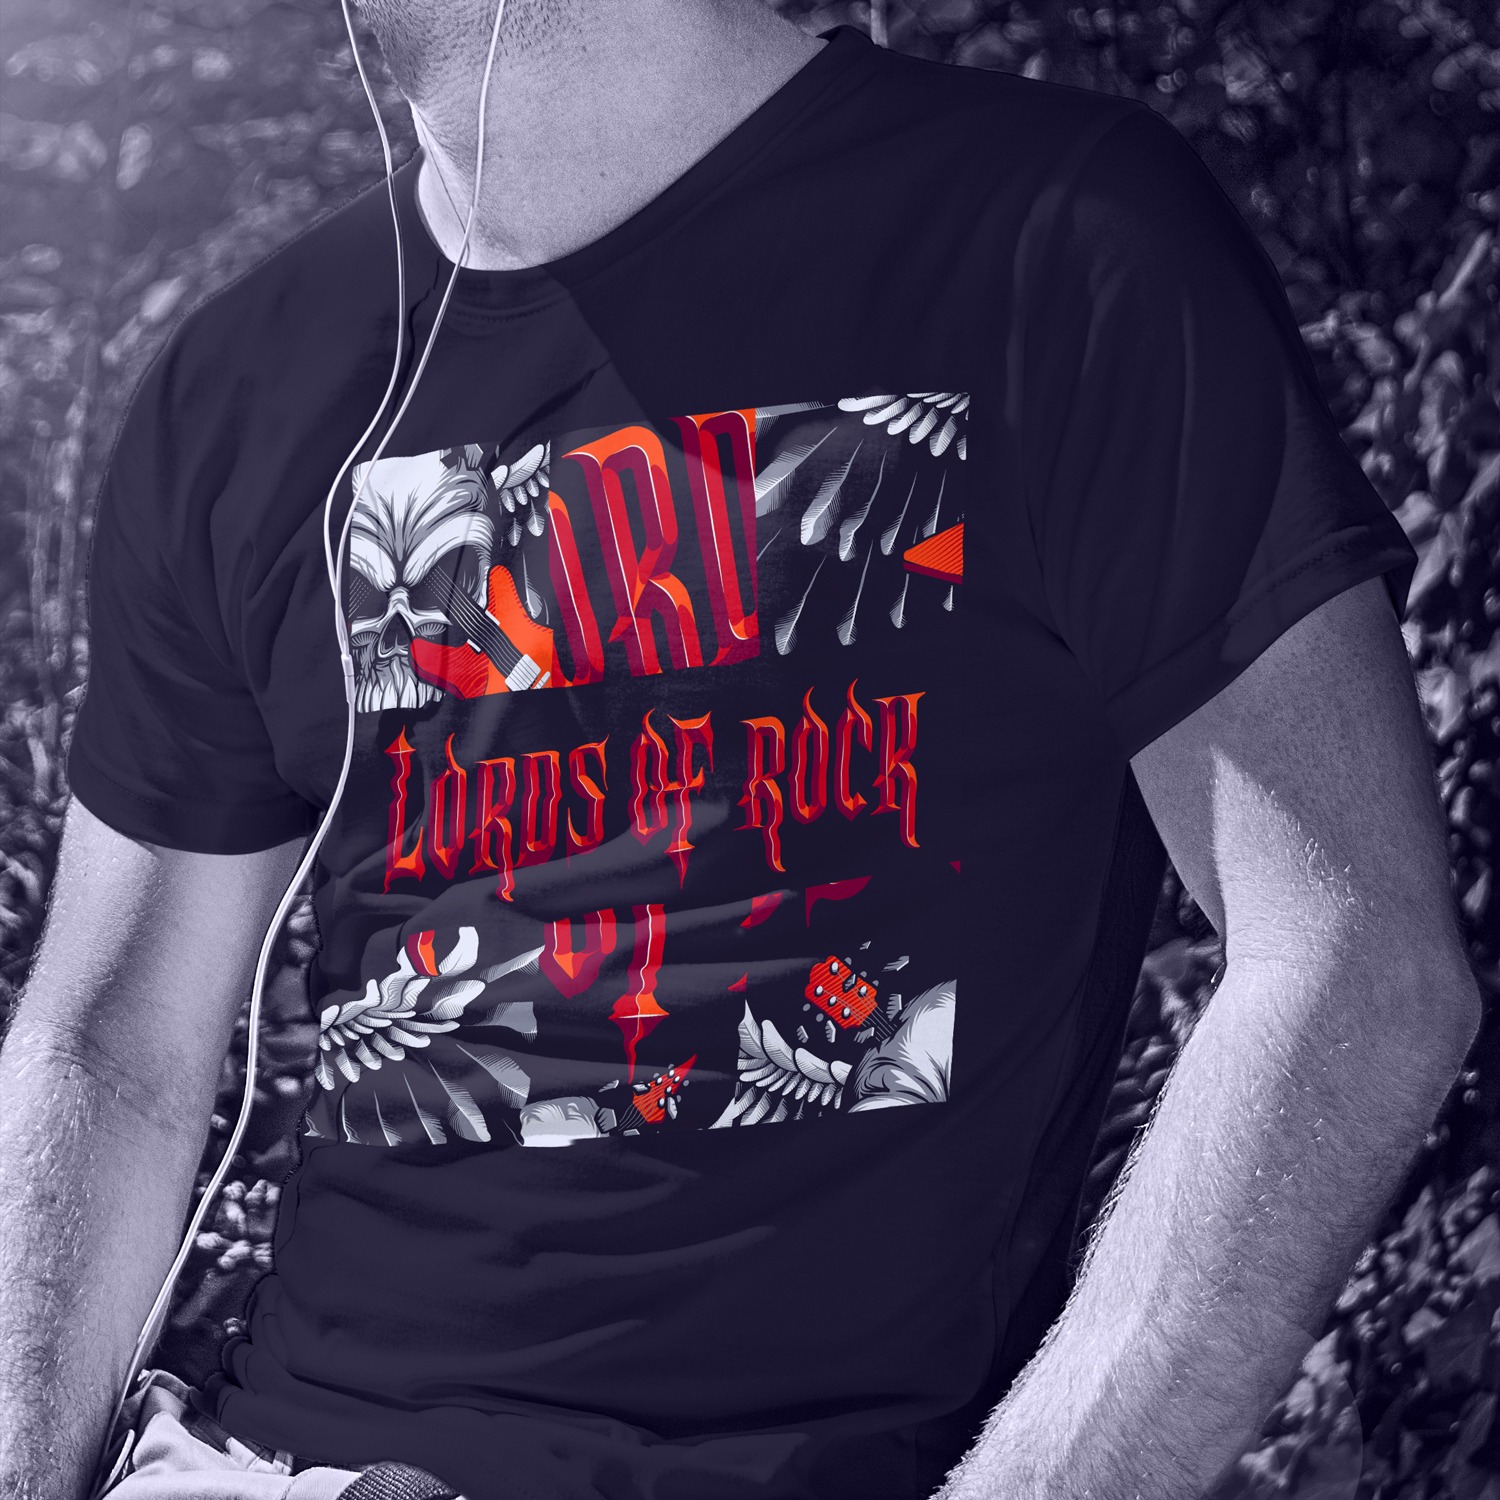 Tee-shirt Lords of rock